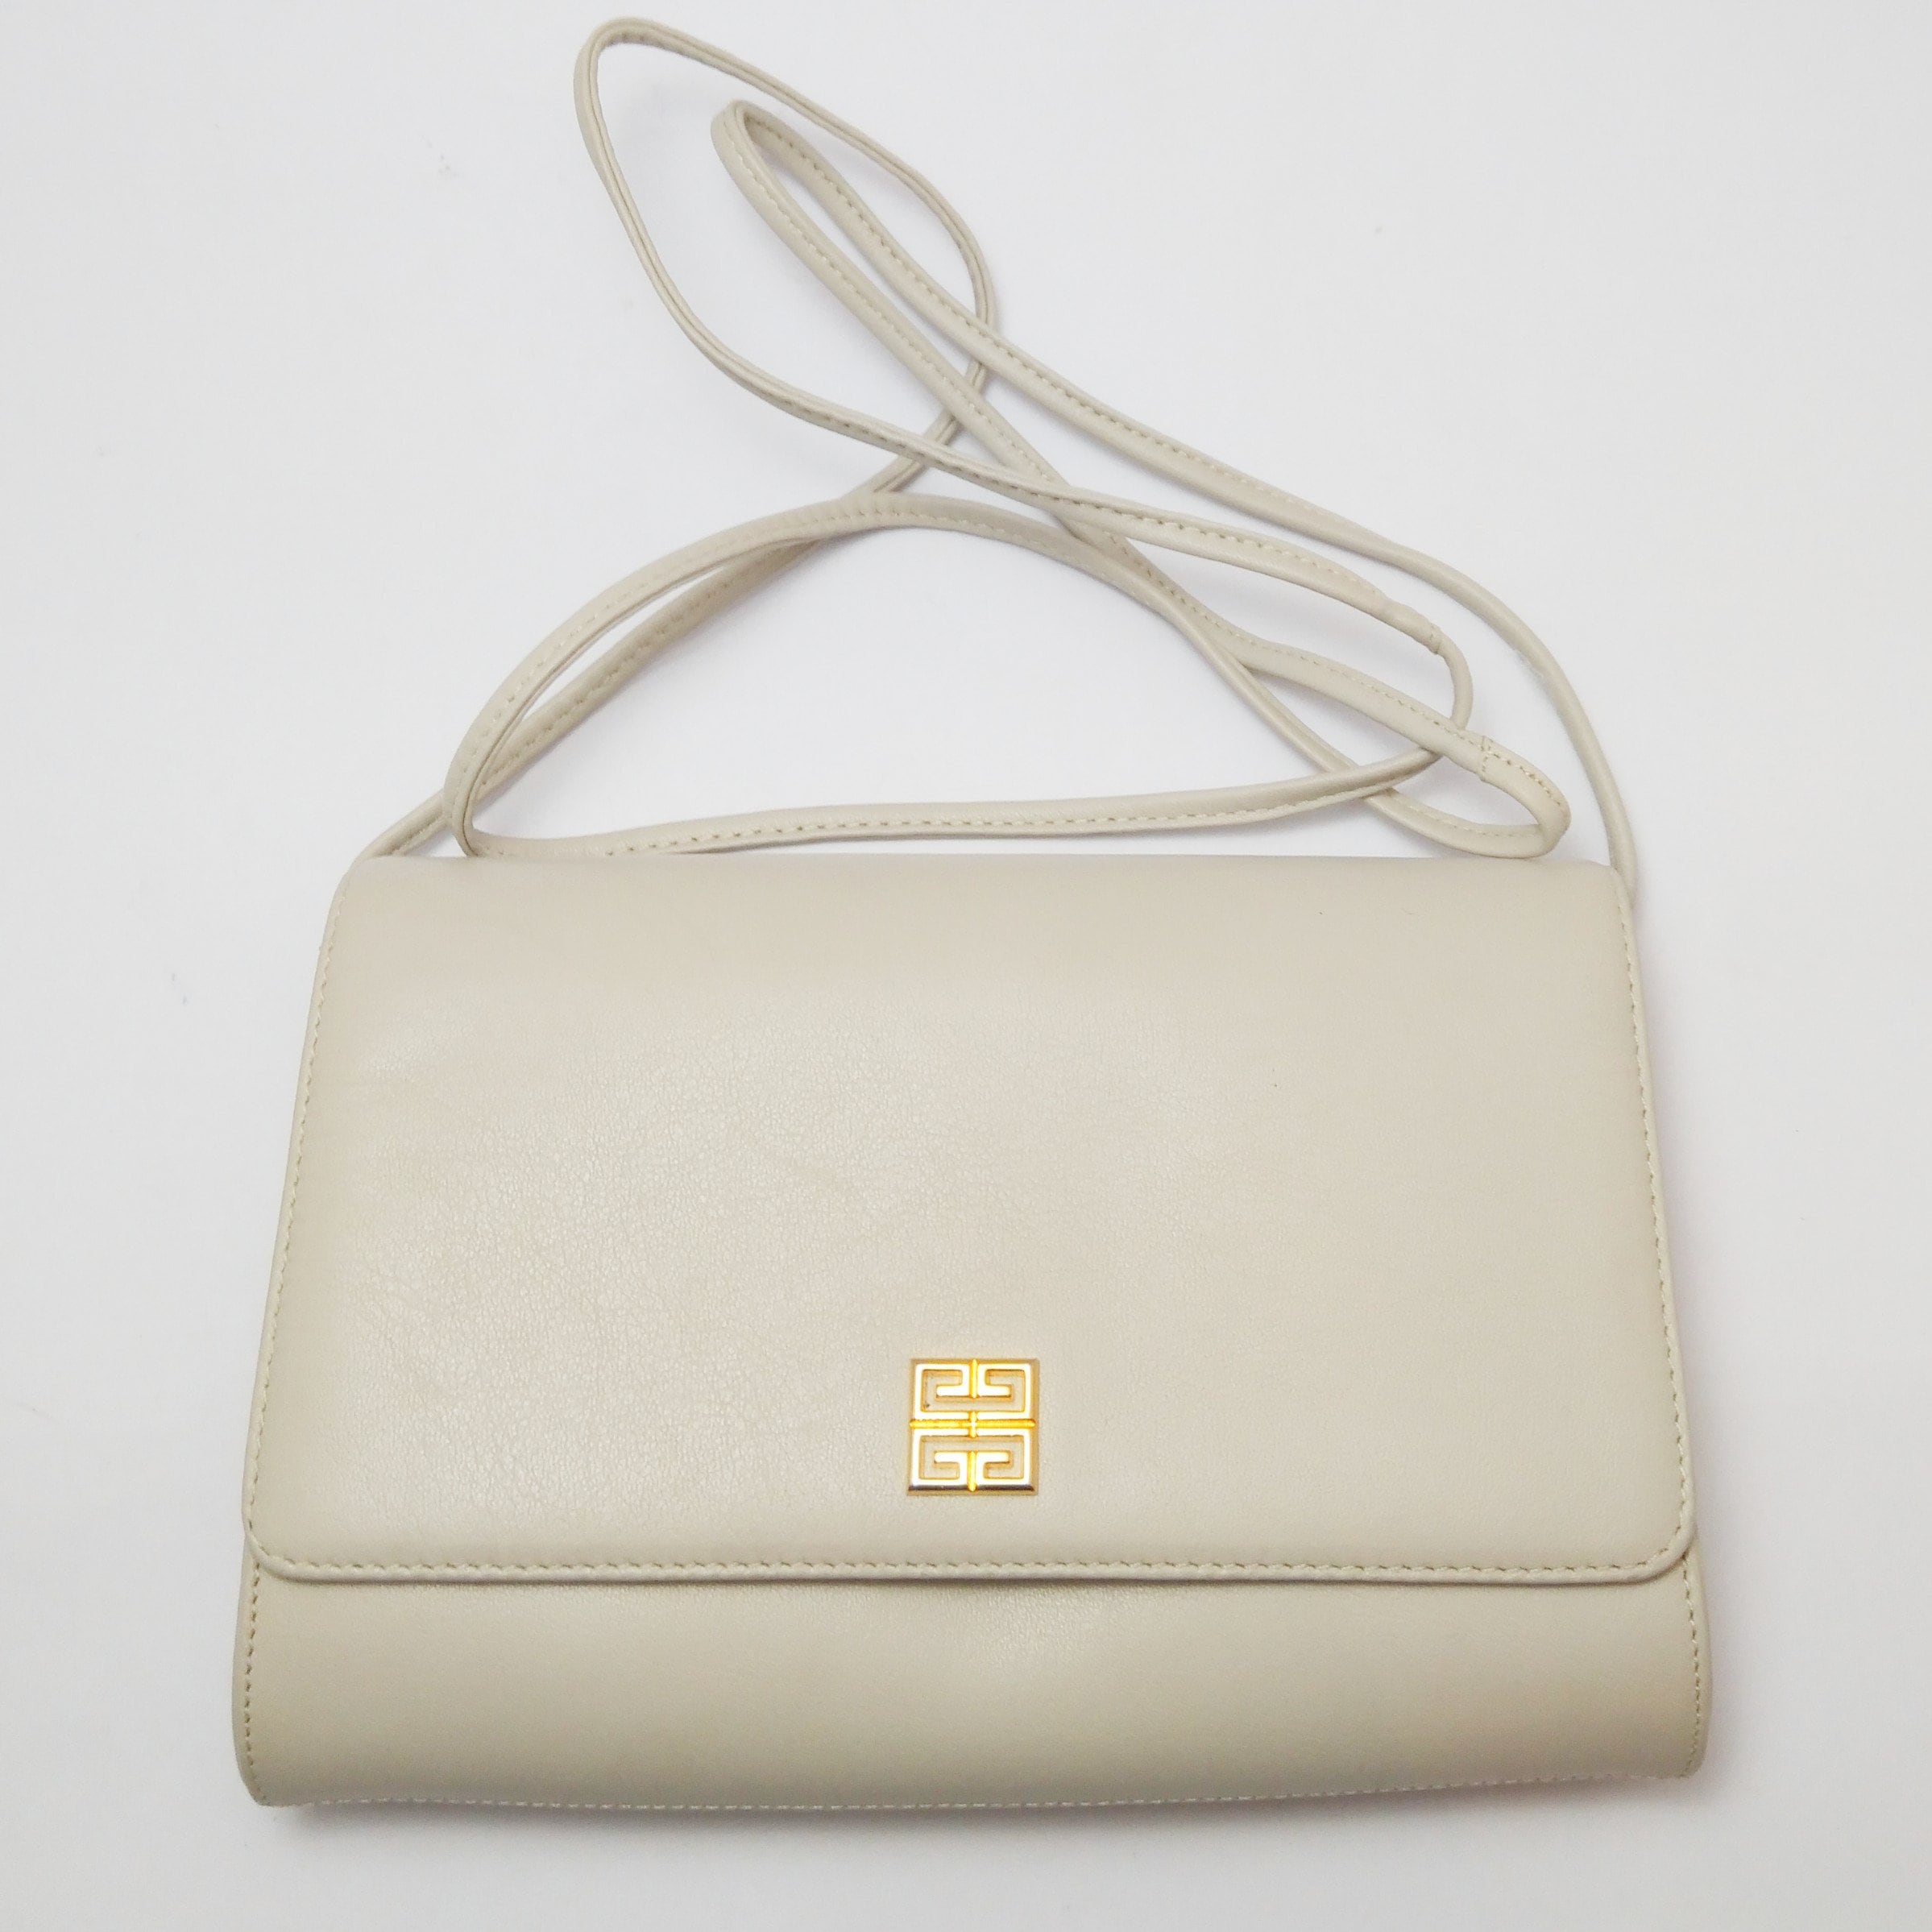 Vintage GIVENCHY Beige Leather Mini Crossbody Bag Authentic 